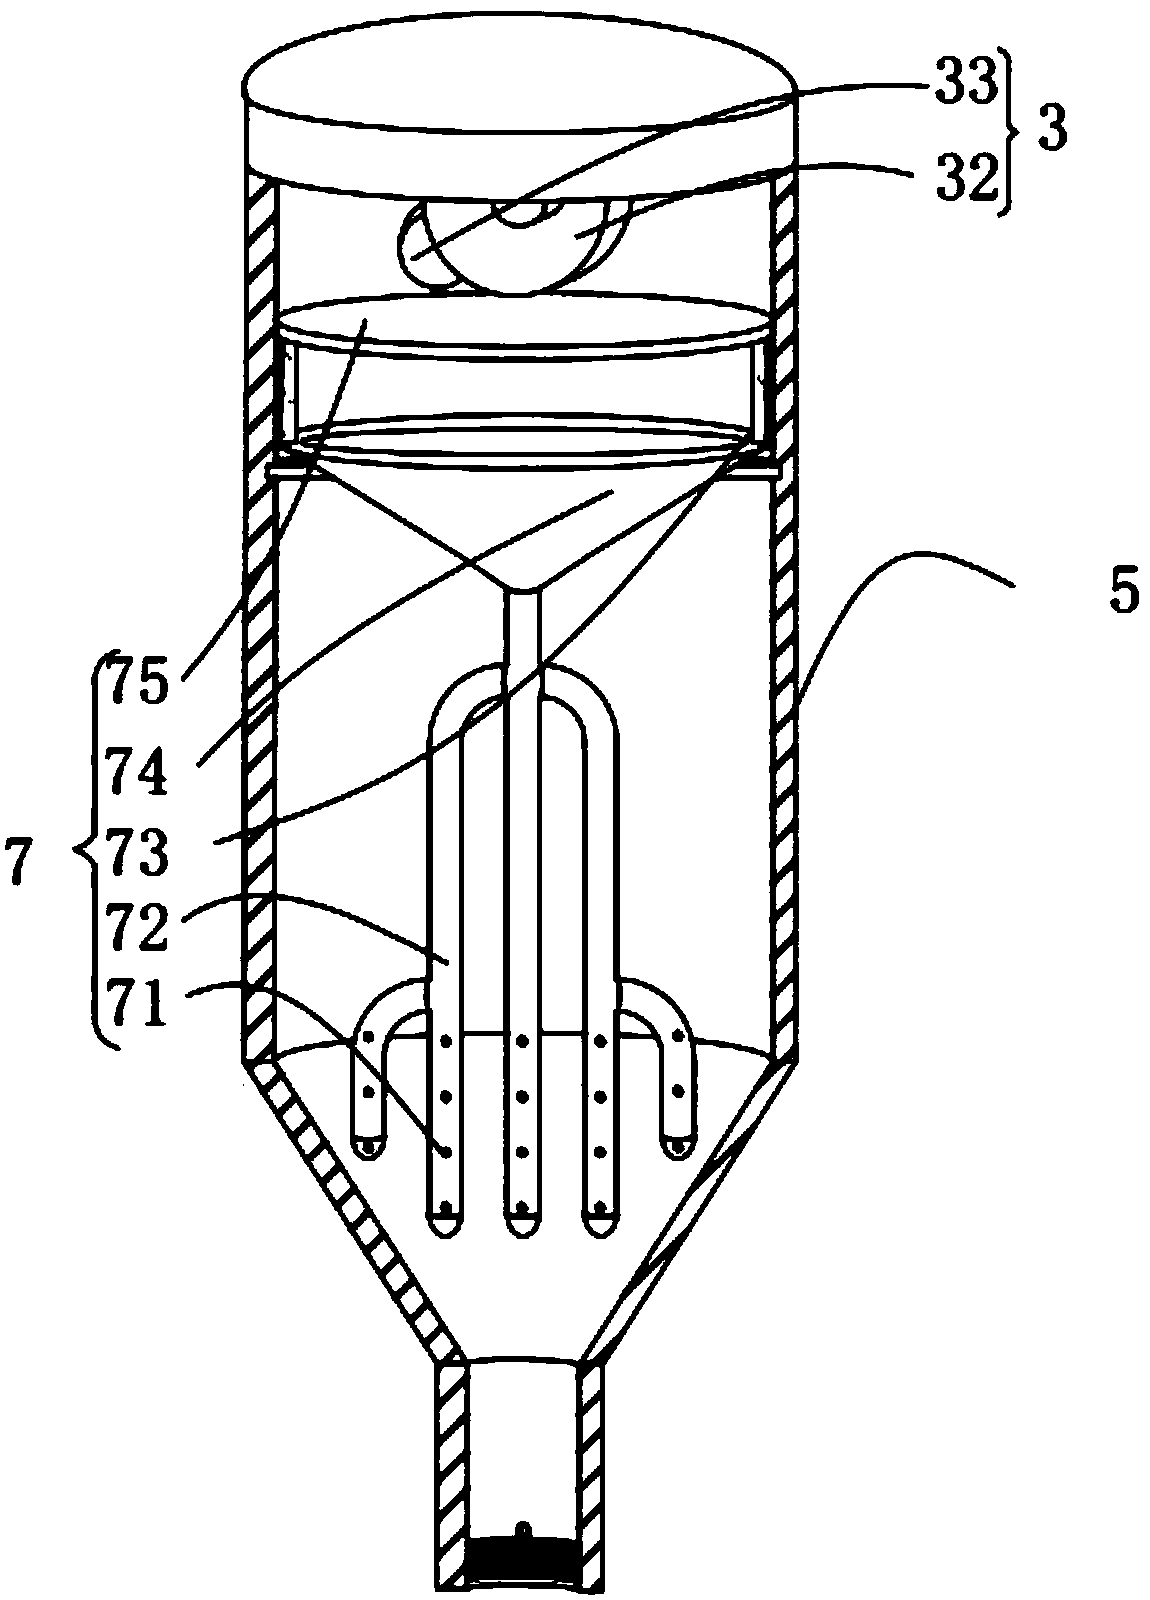 Supercritical fluid extracting device